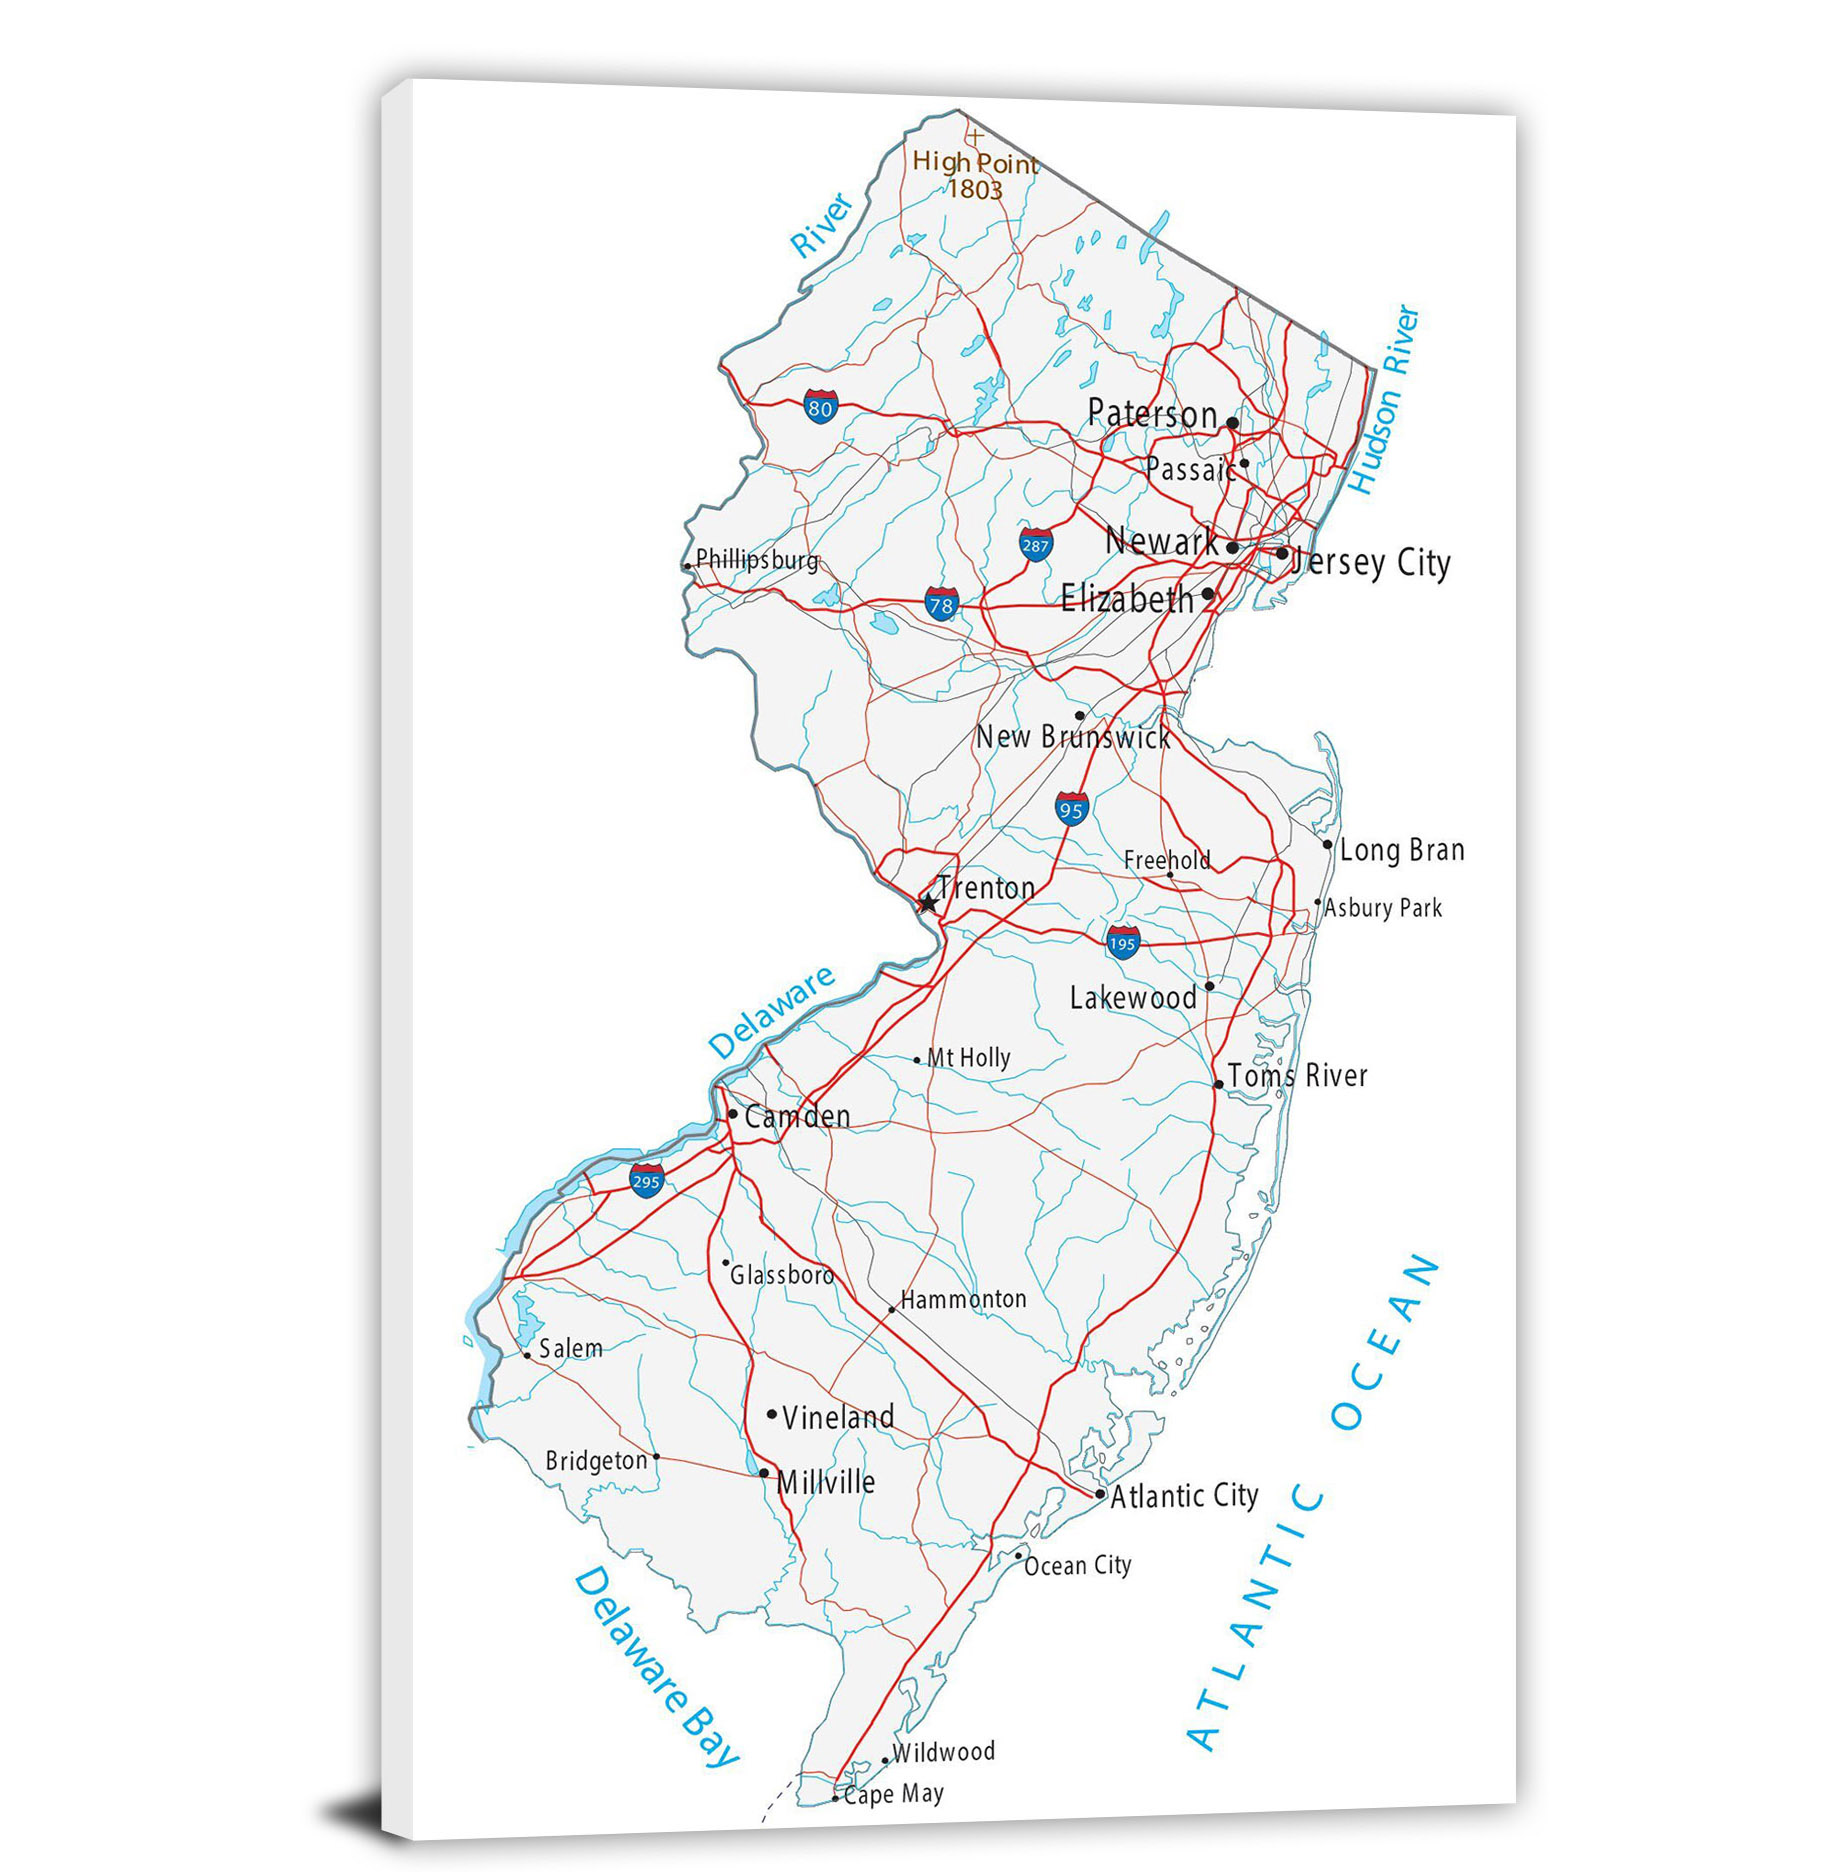 CWA693 New Jersey Roads And Cities Map 00 